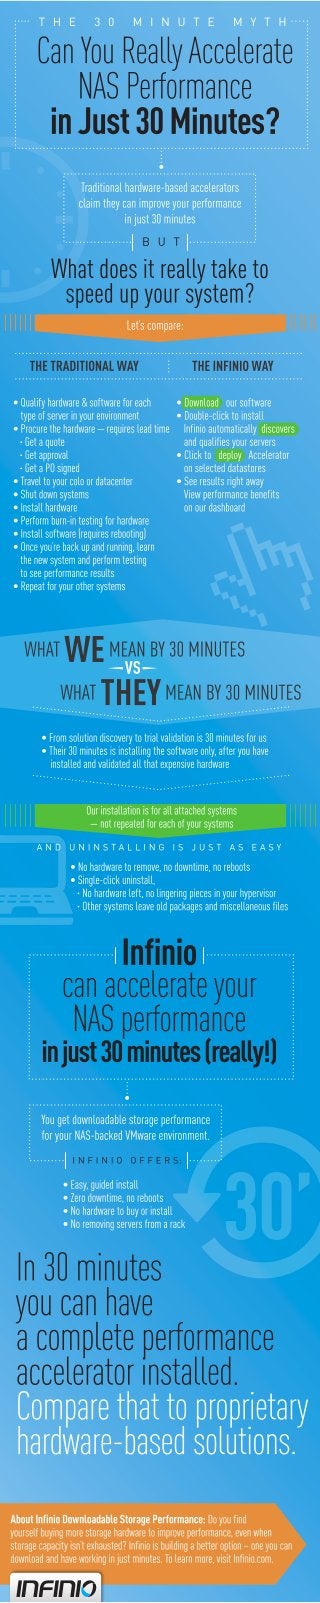 The 30 Minute Myth - Can you really accelerate NAS performance in just 30 minutes?